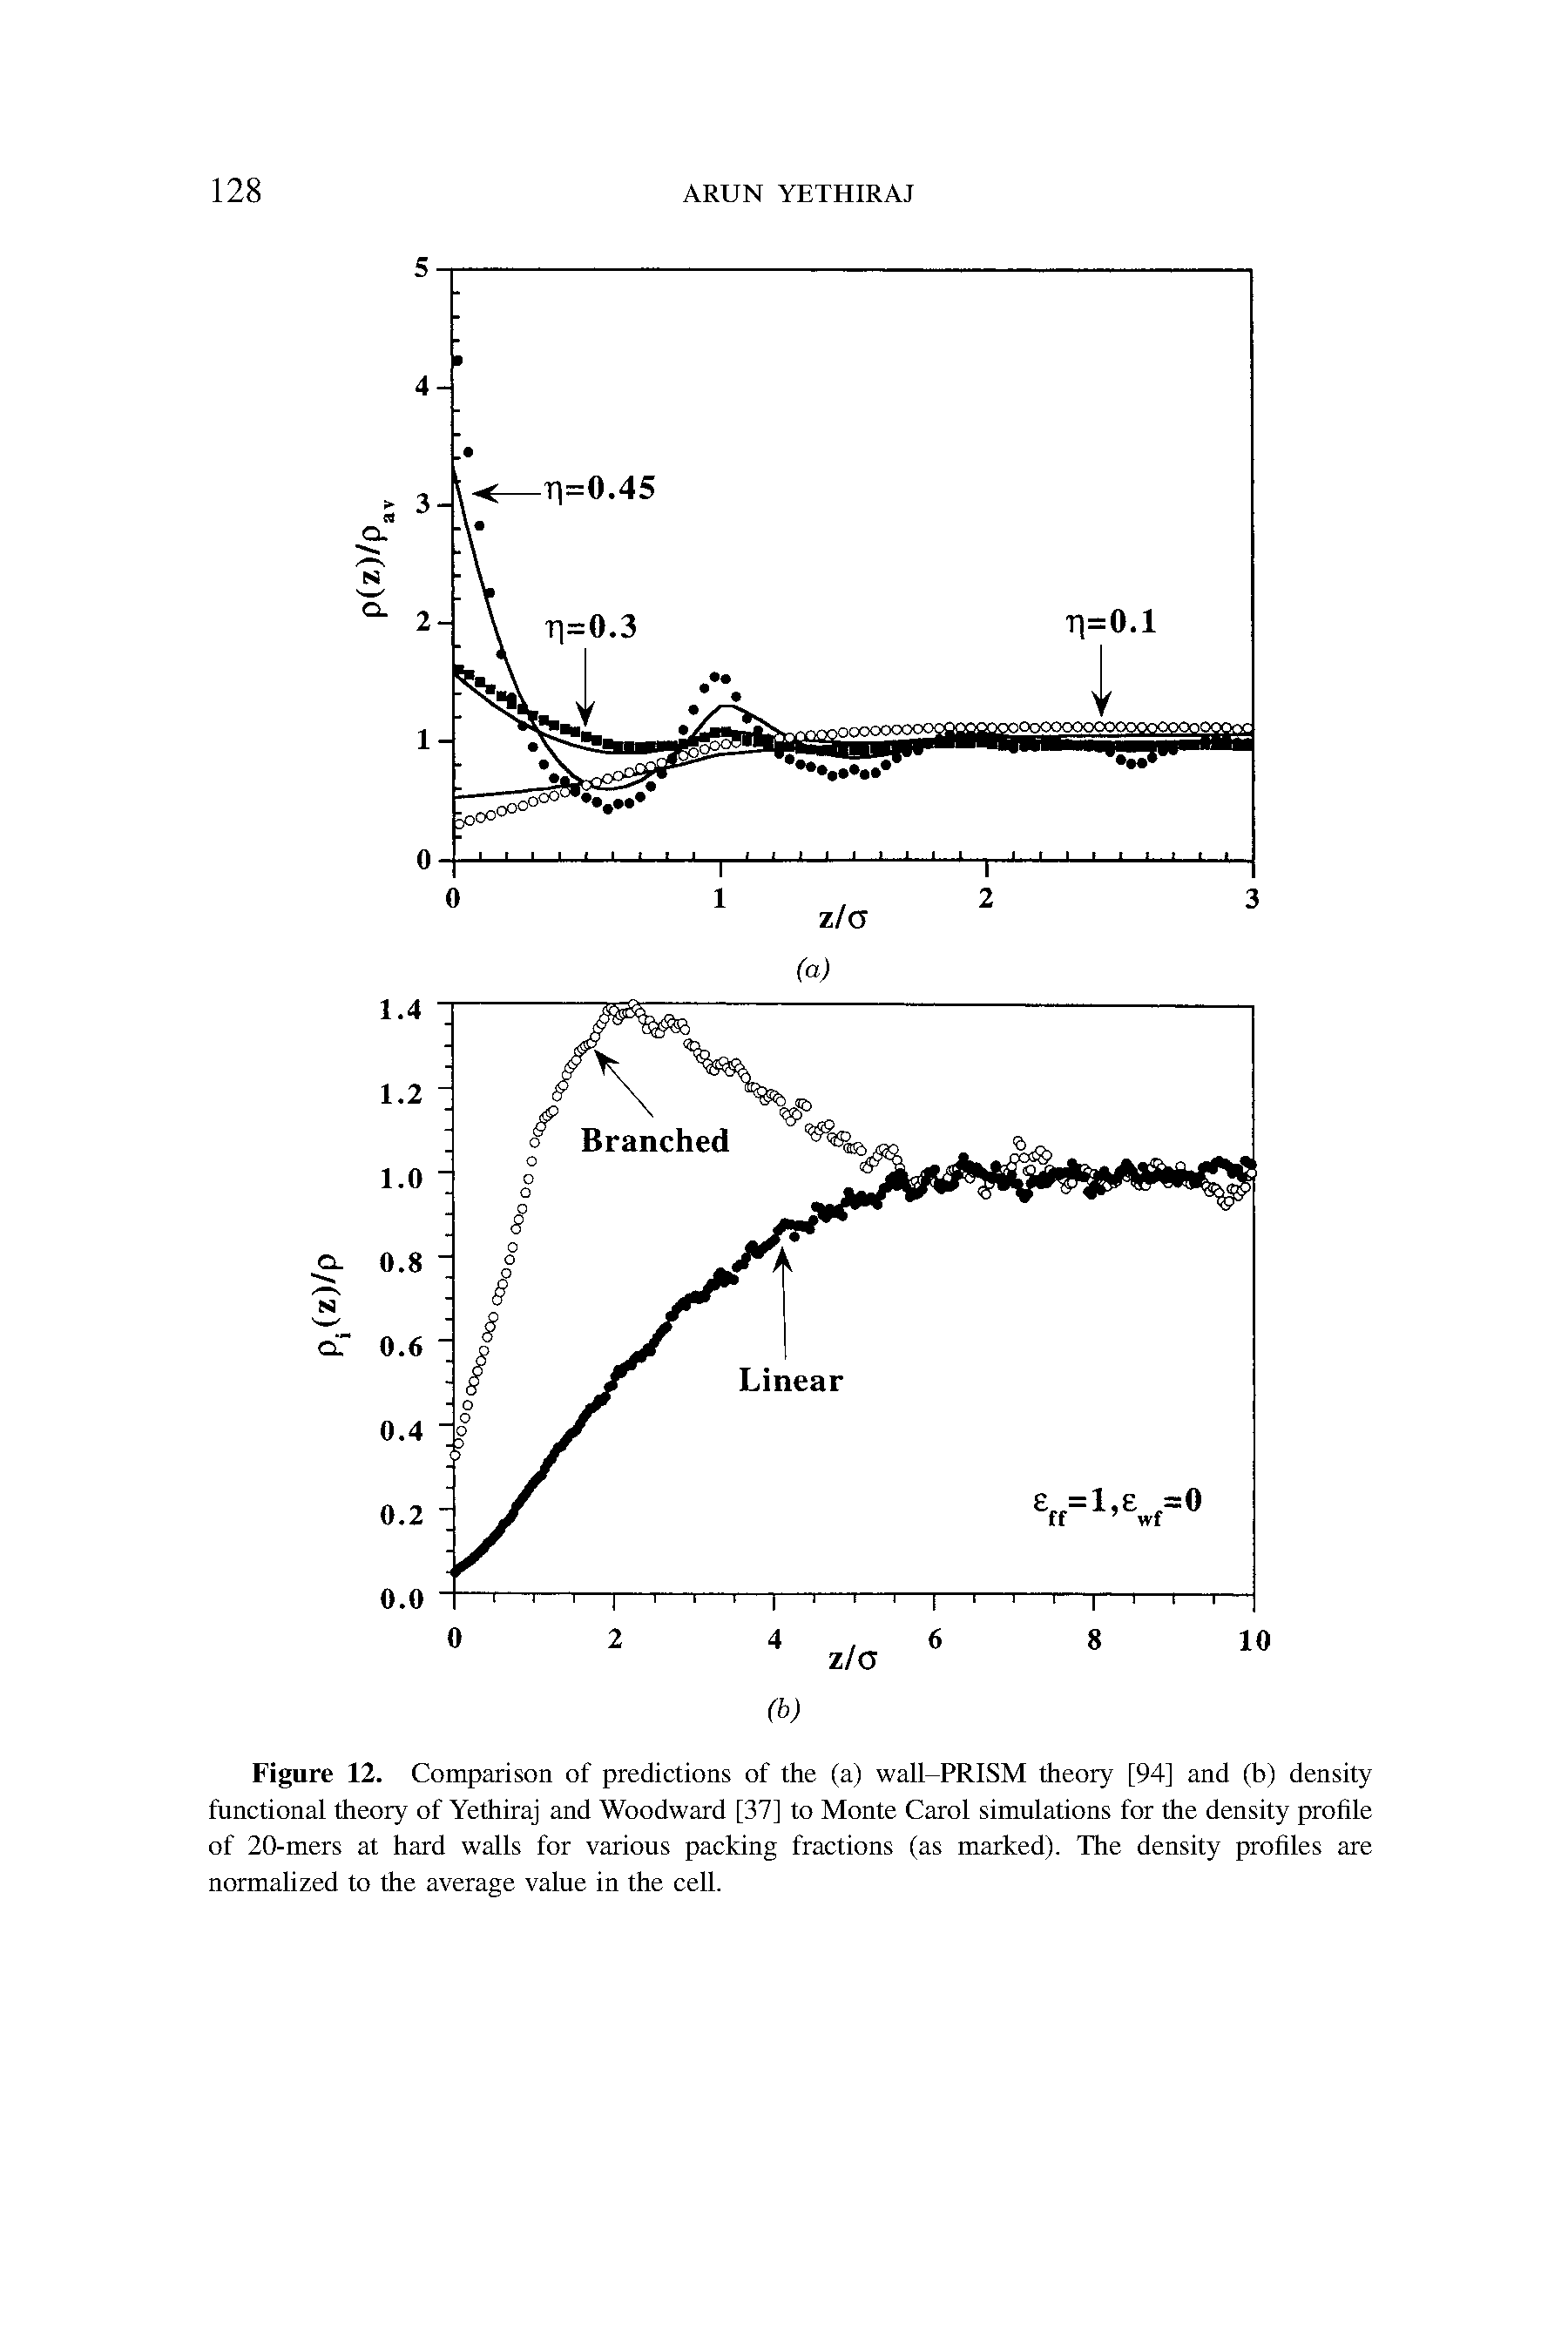 Figure 12. Comparison of predictions of the (a) wall-PRISM theory [94] and (b) density functional theory of Yethiraj and Woodward [37] to Monte Carol simulations for the density profile of 20-mers at hard walls for various packing fractions (as marked). The density profiles are normalized to the average value in the cell.